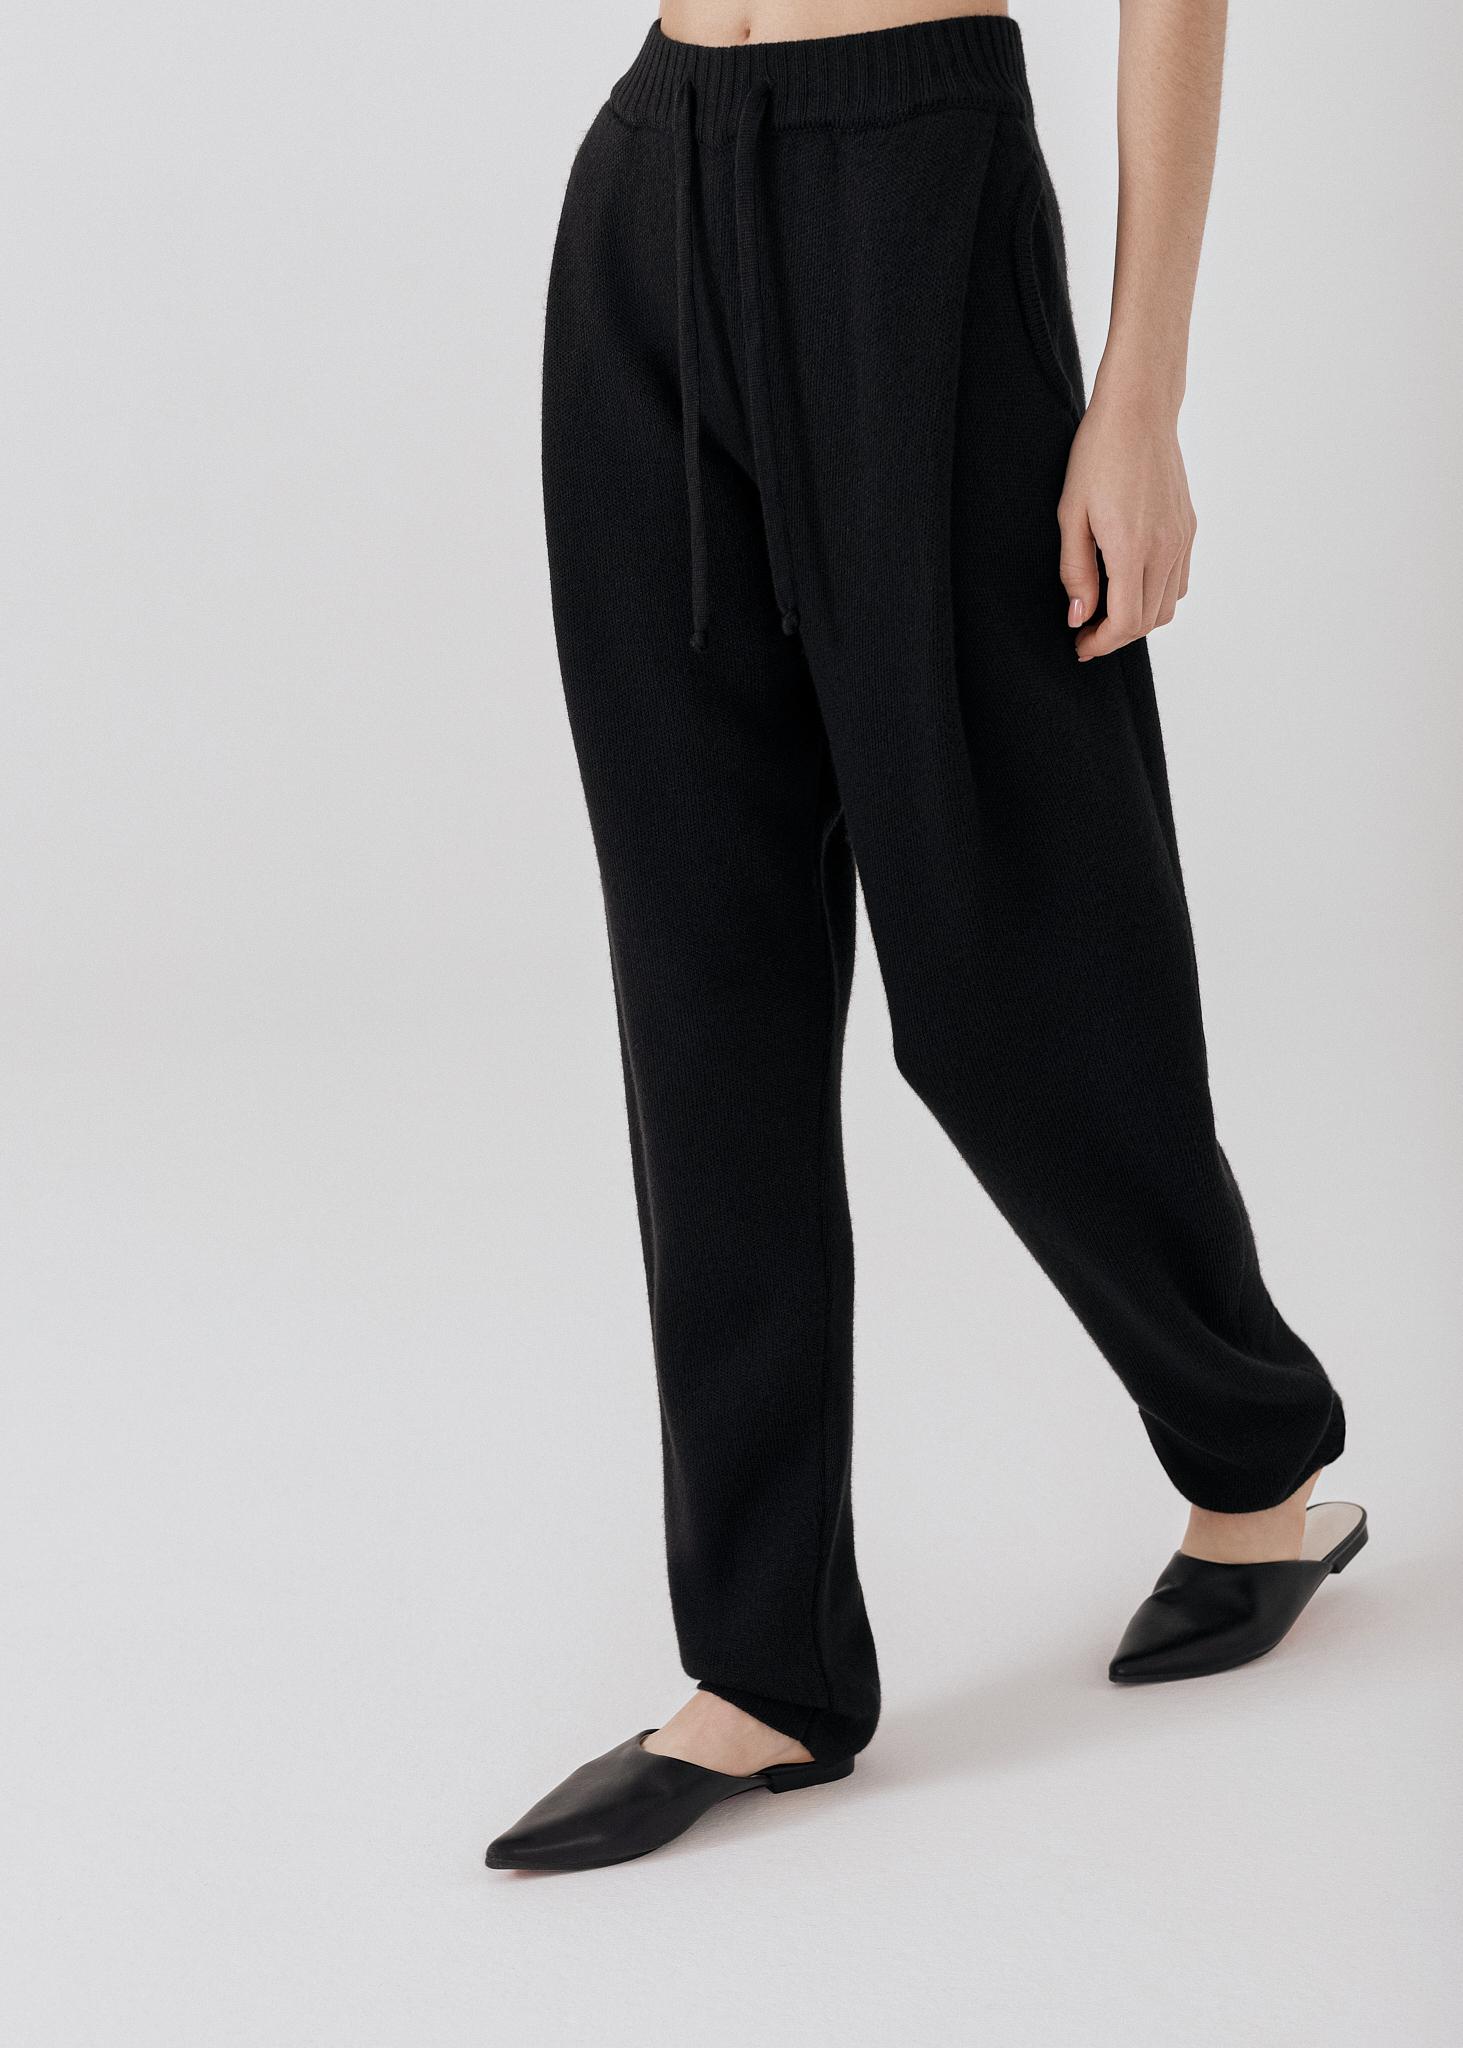 Merino wool dress pants perfect for everyday wear | Baron Boutique